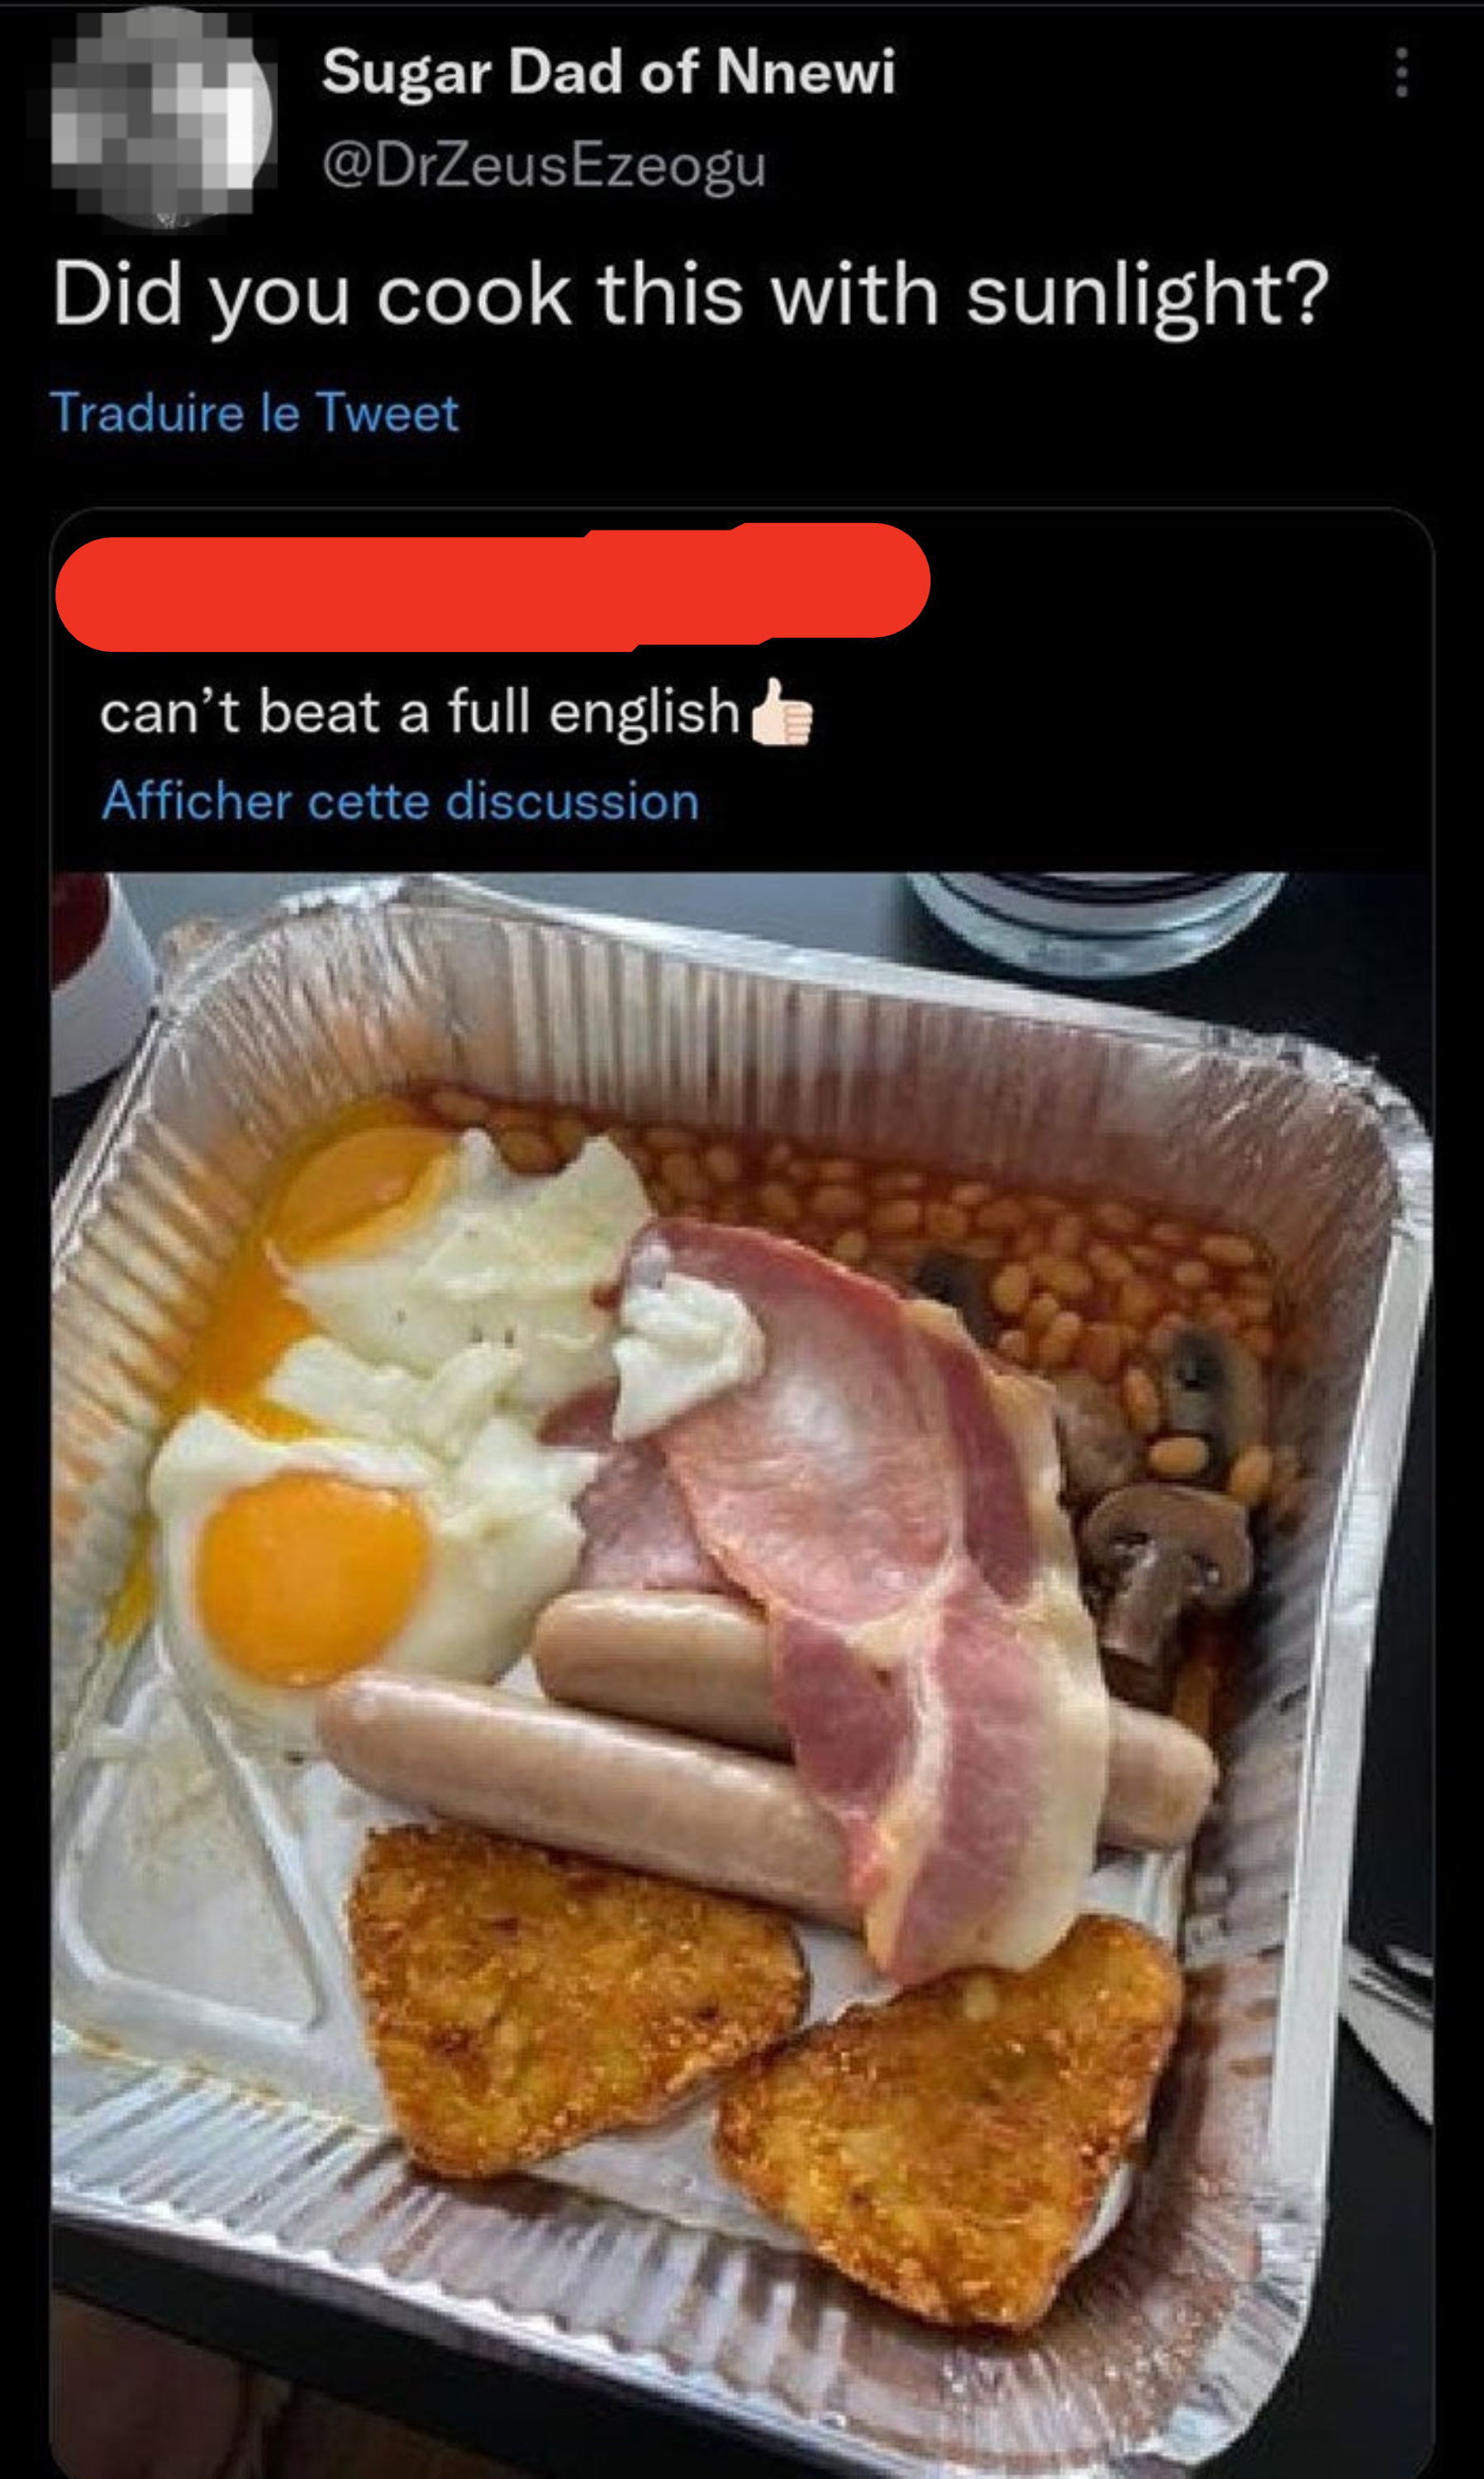 &quot;Can&#x27;t beat a full English,&quot; with a photo showing fried eggs, sausages, ham, baked beans, and either breaded meat or hash browns in a tray; response: &quot;Did you cook this with sunlight?&quot;